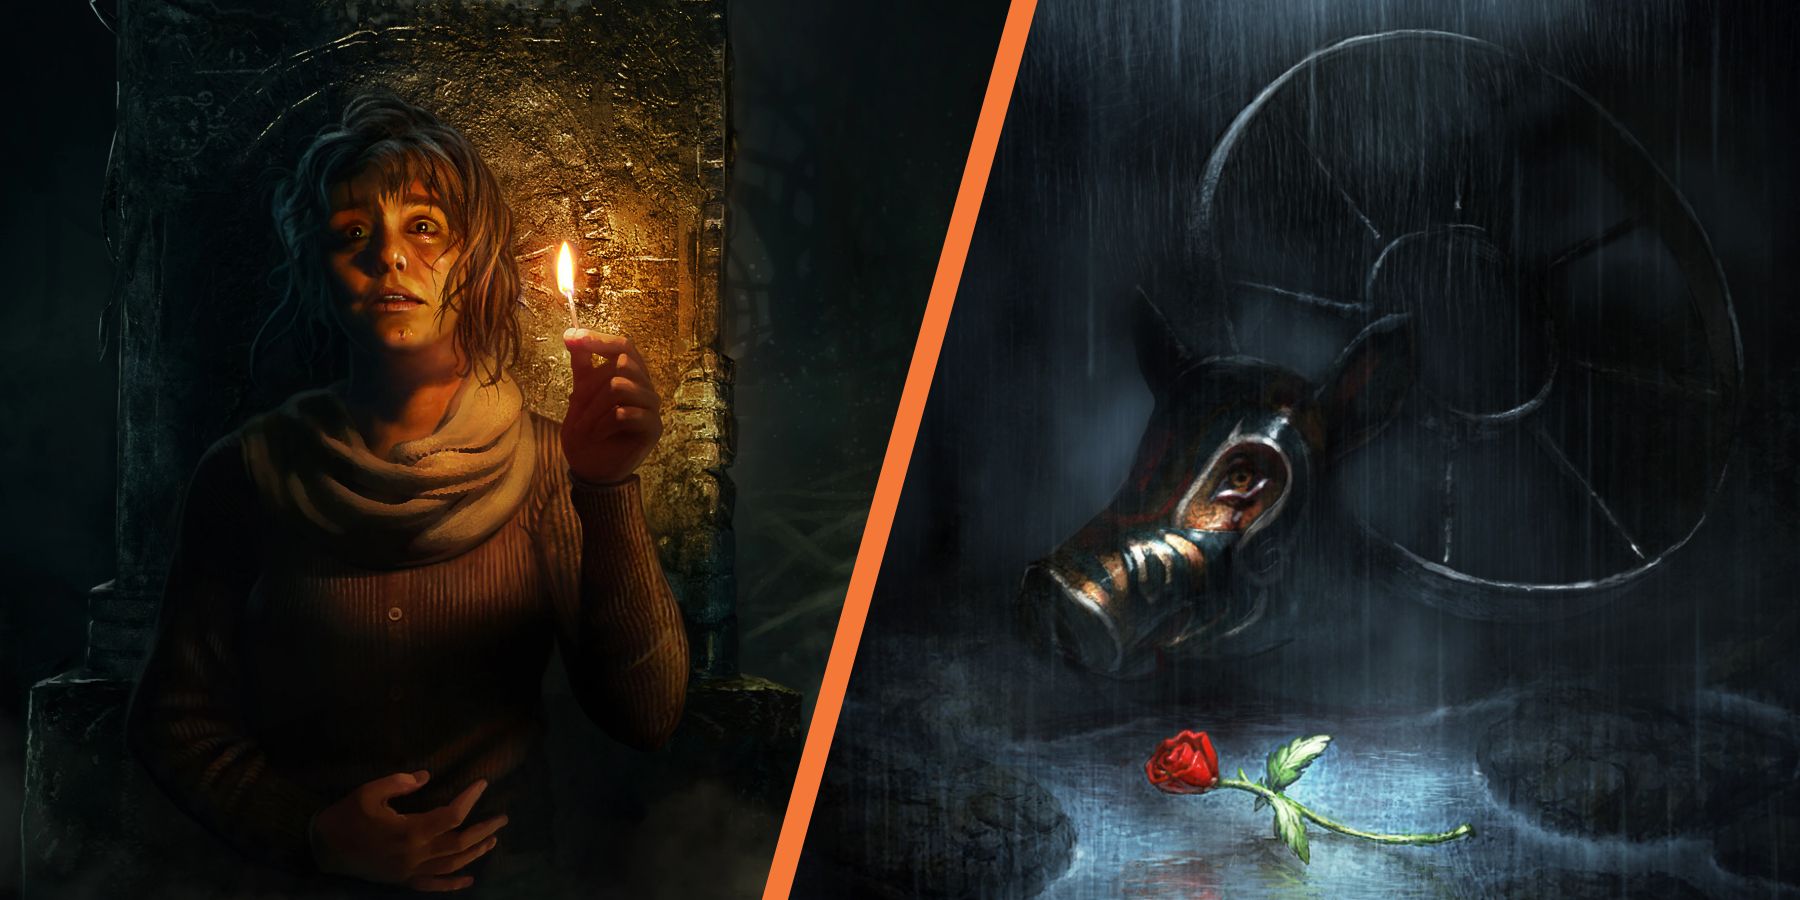 The cover art of both Amnesia Rebirth and Amnesia Collection side-by-side